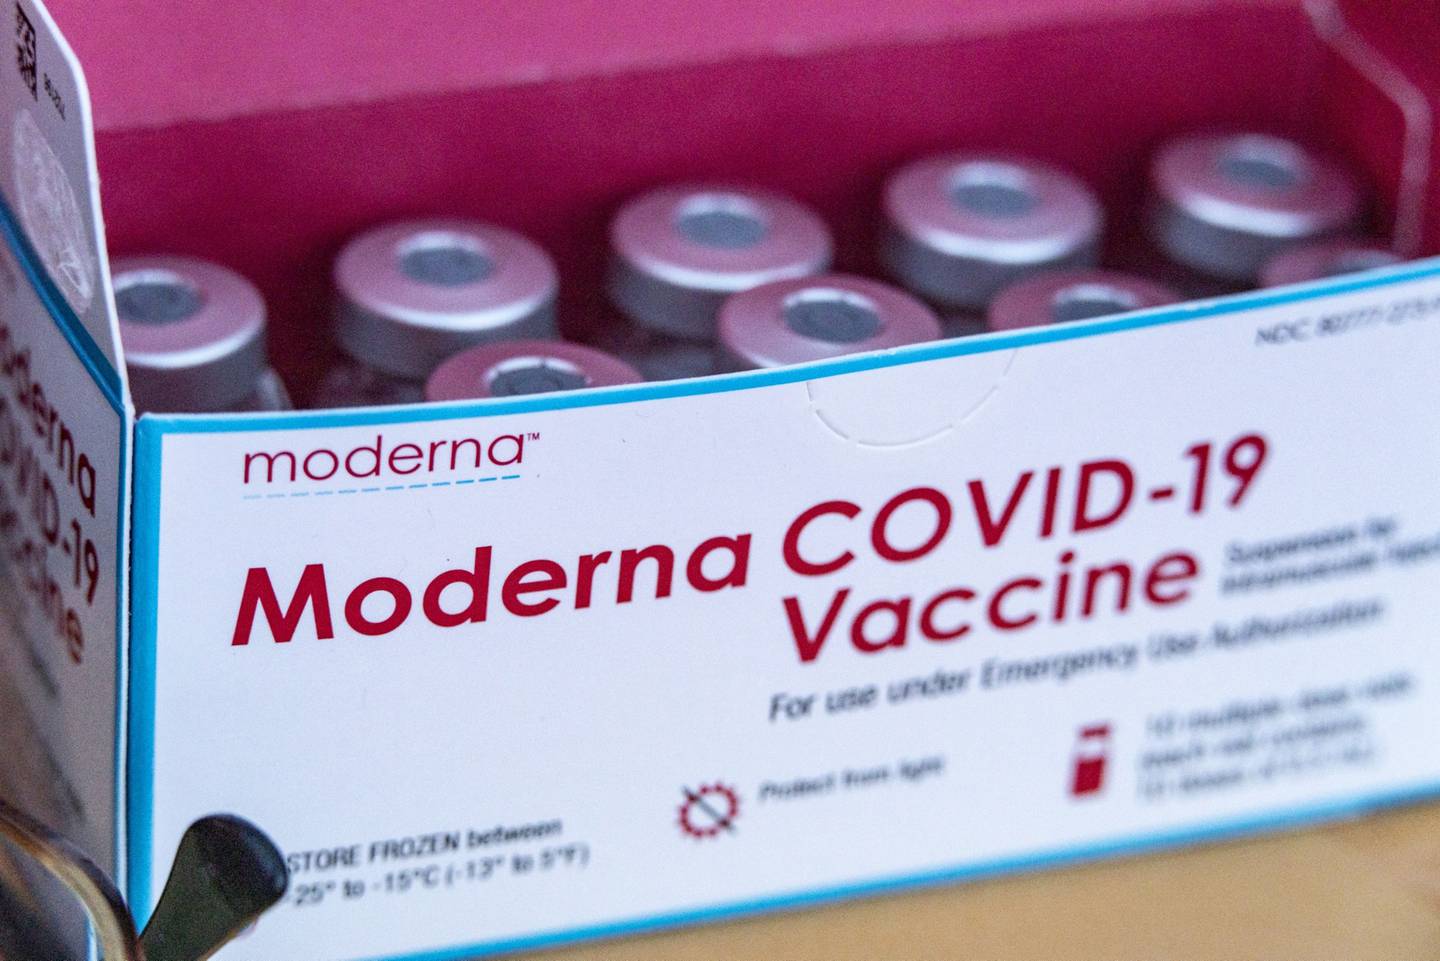 A box of the Moderna Covid-19 vaccine vials at a drive-thru vaccination site at the Meigs County fairgrounds in Pomeroy, Ohio, U.S., on Thursday, March 18, 2021.